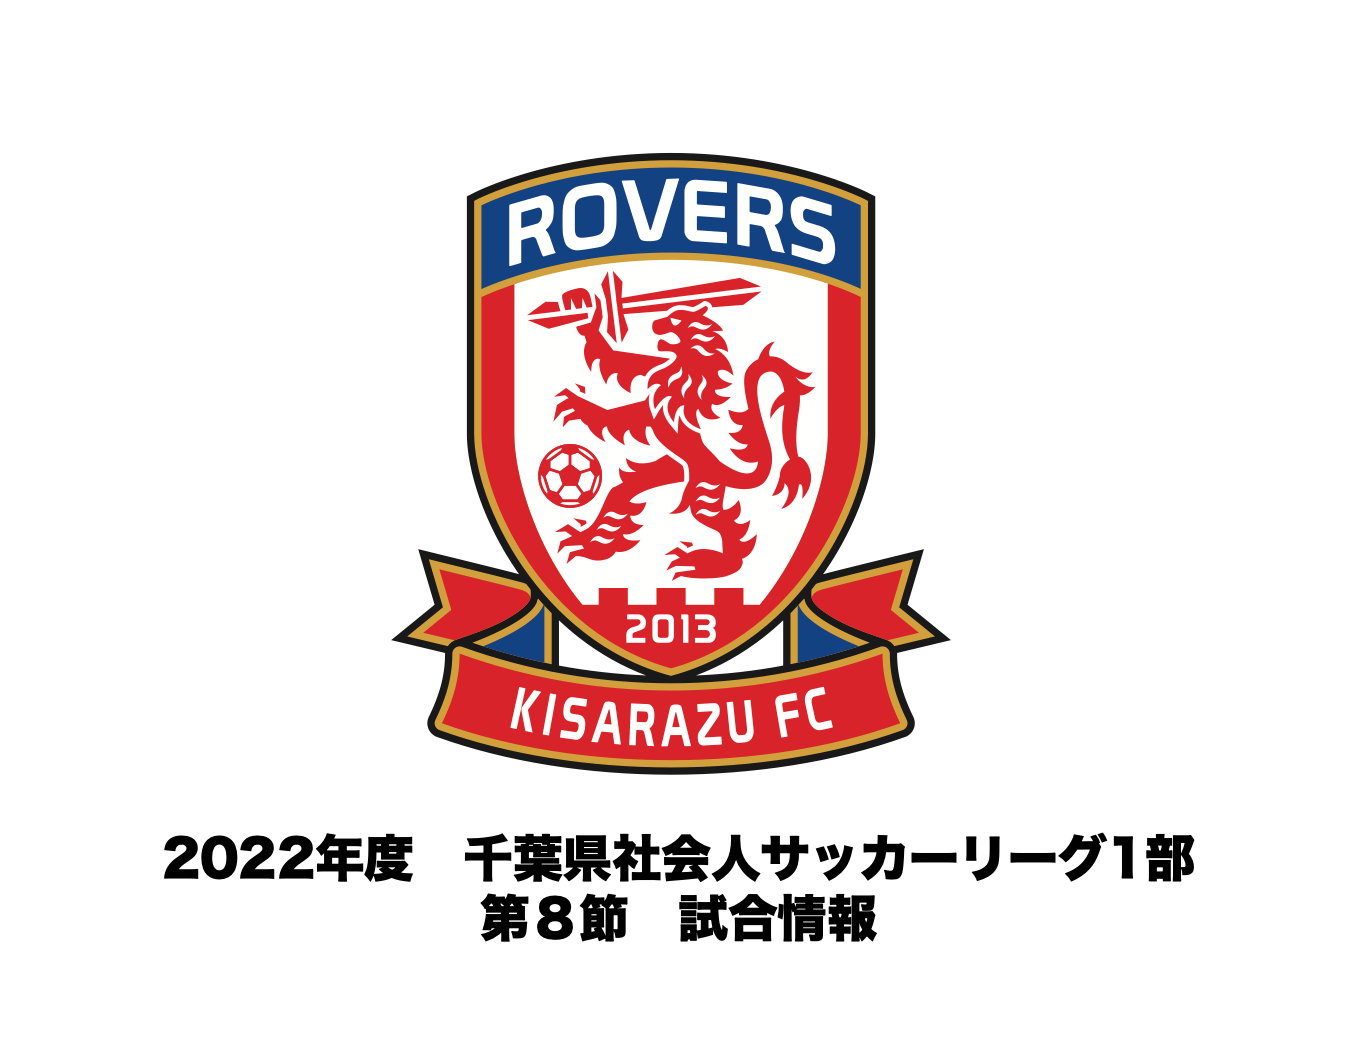 You are currently viewing 【試合情報】2022年度 千葉県社会人サッカーリーグ1部 第8節について